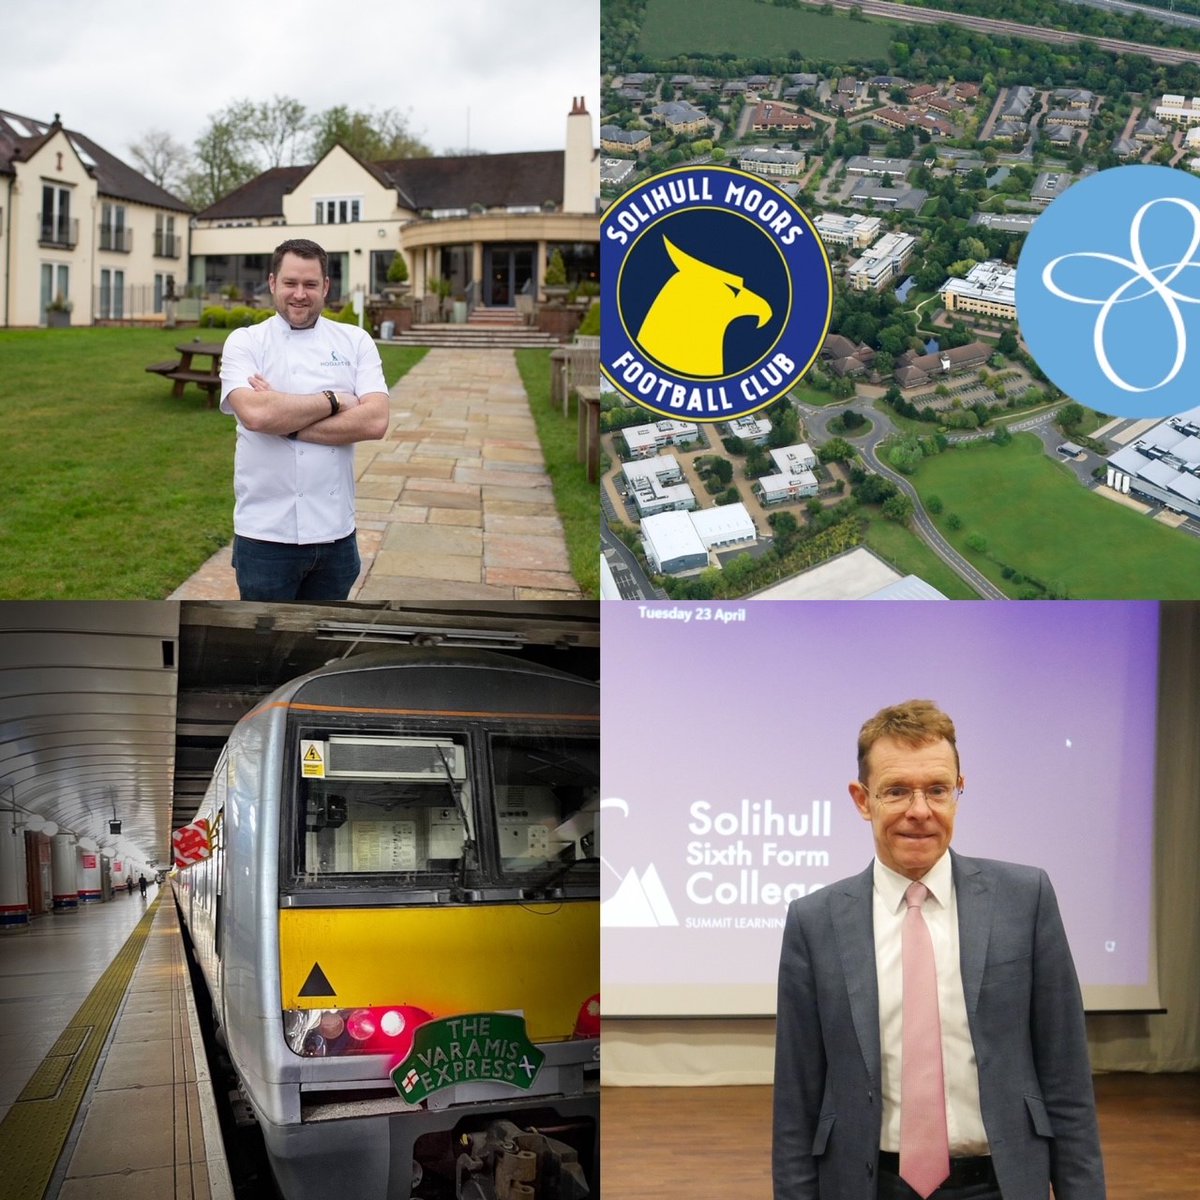 It's newsletter time 🗞 👨‍🍳Chef in new partnership with luxury hotel ⚽Business park to support football club’s trip to Wembley 🚄Railway logistics company launches new zero emissions freight service ⭐West Mids mayor visits Solihull college More news 👉 tinyurl.com/37kxth25